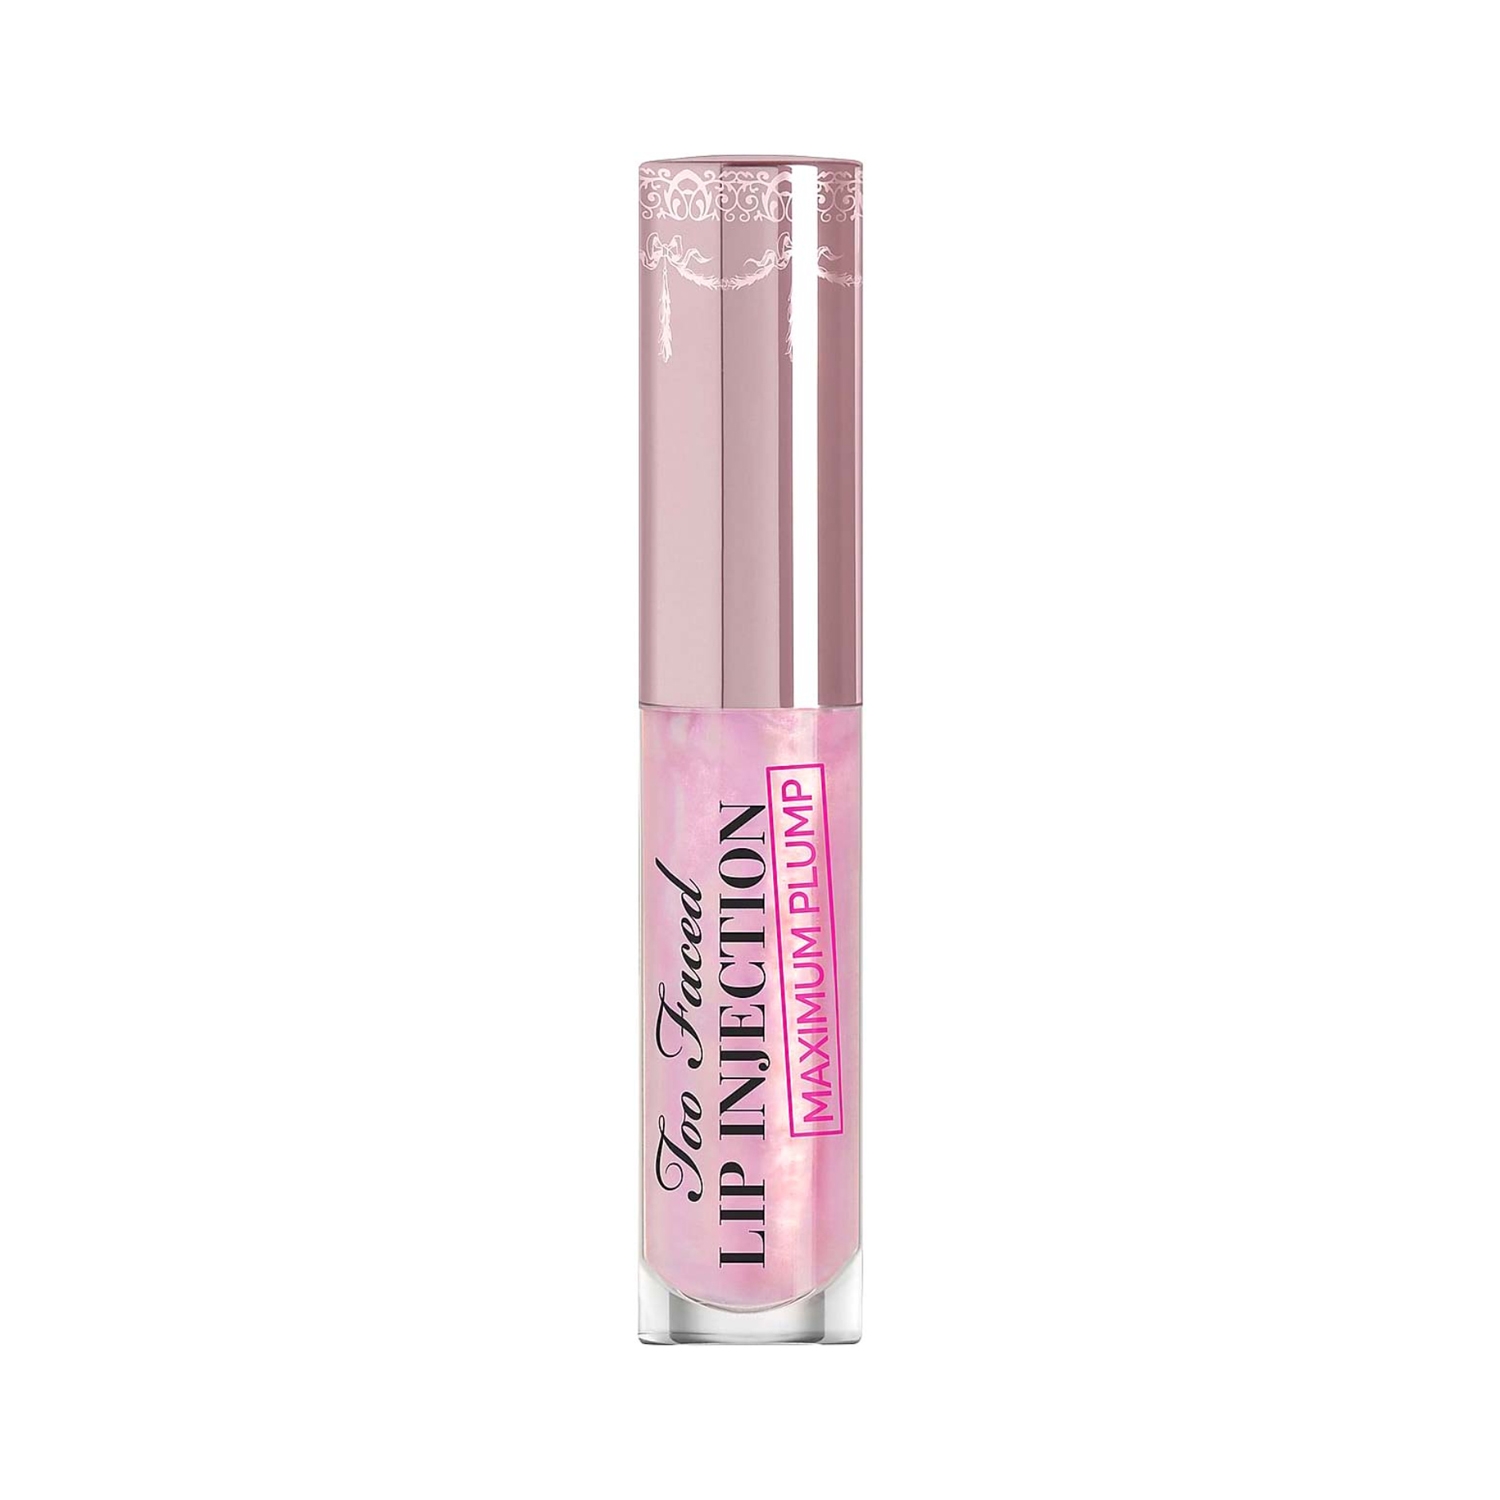 Too Faced | Too Faced Lip Injection Maximum Plump - (2.8g)